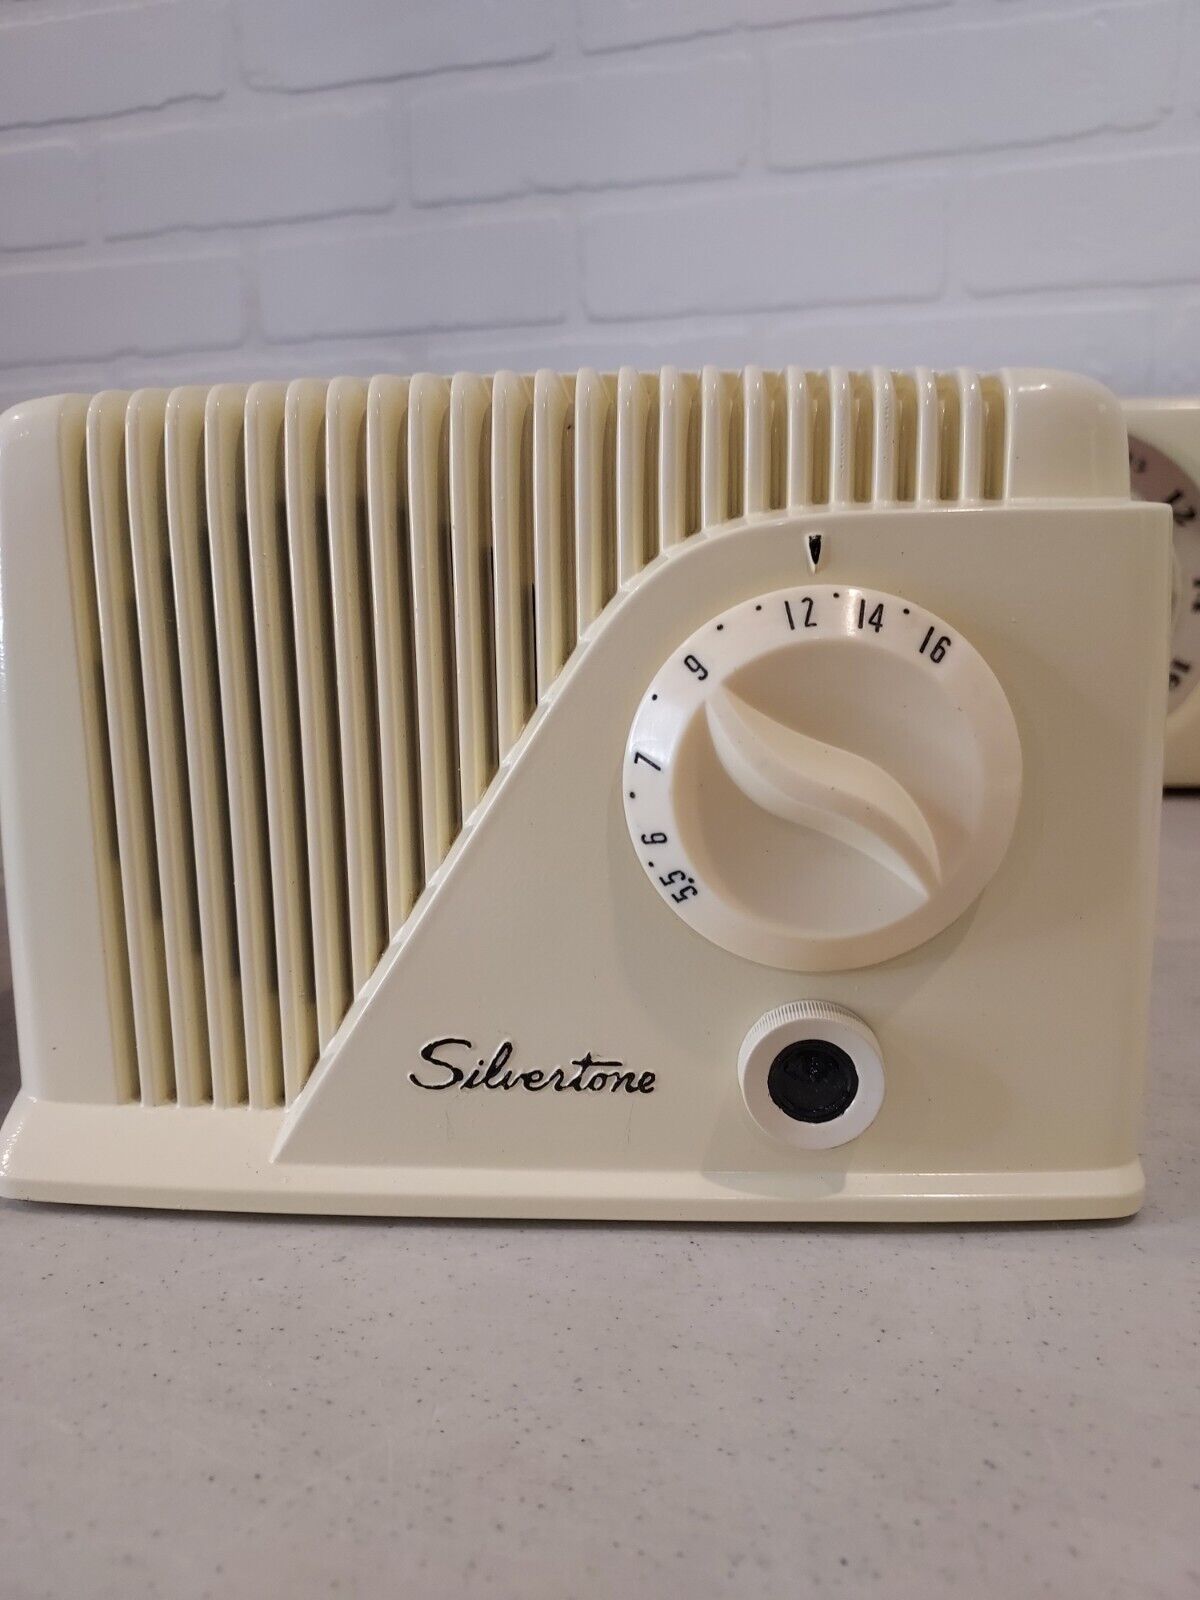 The Silvertone Model 9000 is a wonderful example of 1940's streamlined design